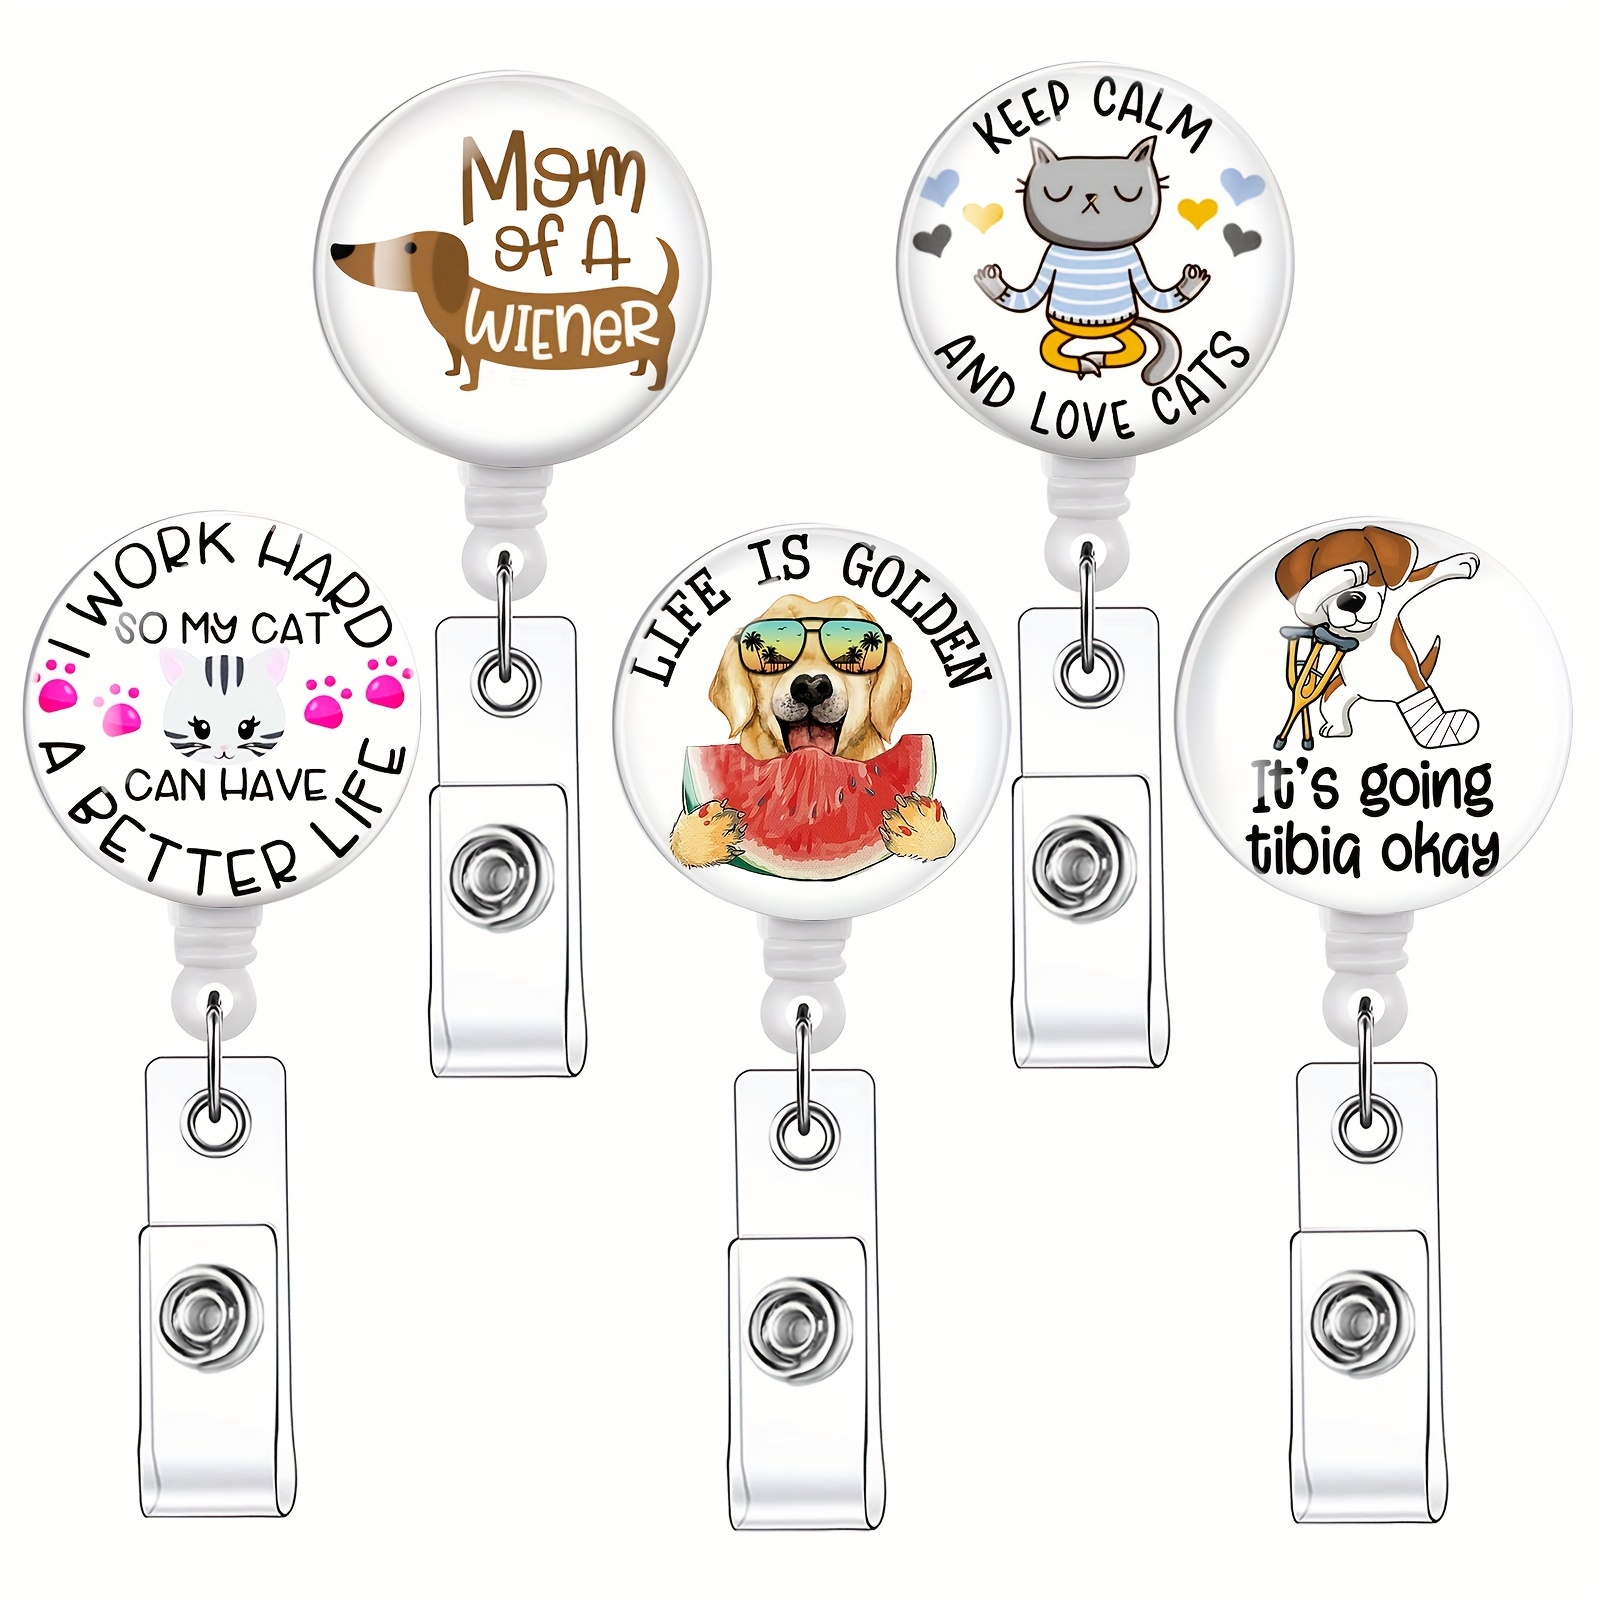 5pcs Funny Badge Reels Retractable Badge Holders, Funny Badge Reel Cute  Badge Reel Nurse Badge Reel Accessories For Work, Nursing Student Must  Haves